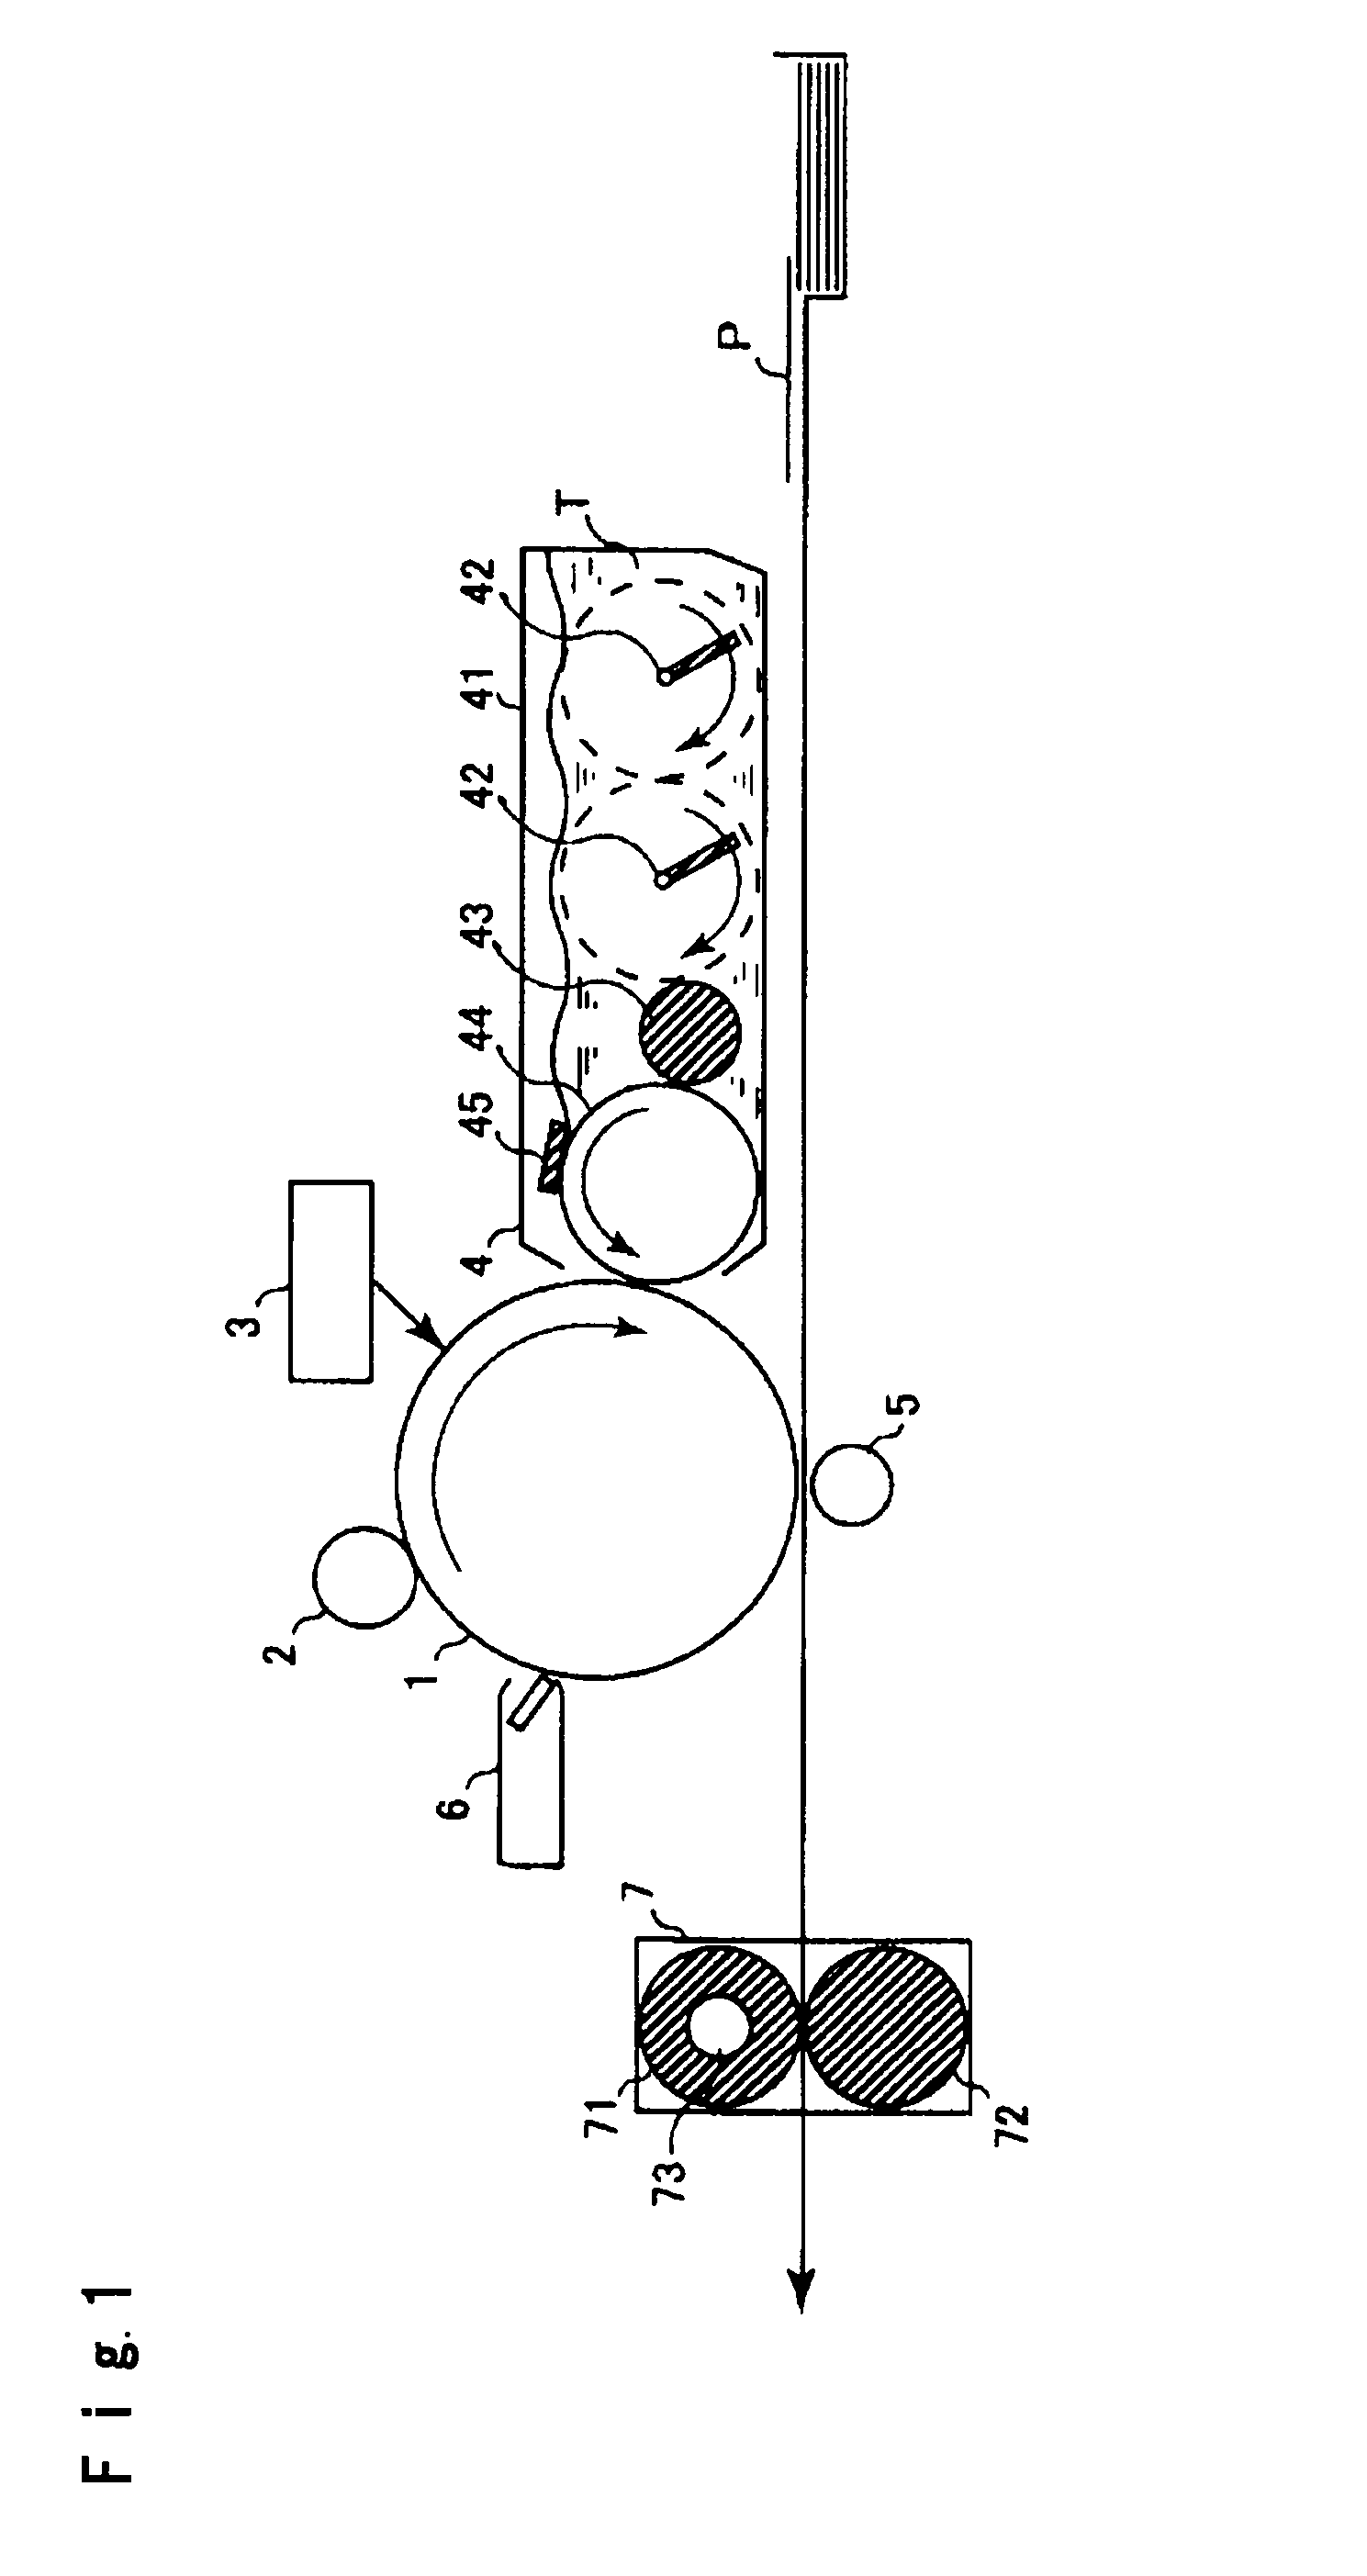 Electrophotographic photoreceptor and apparatus for image formation